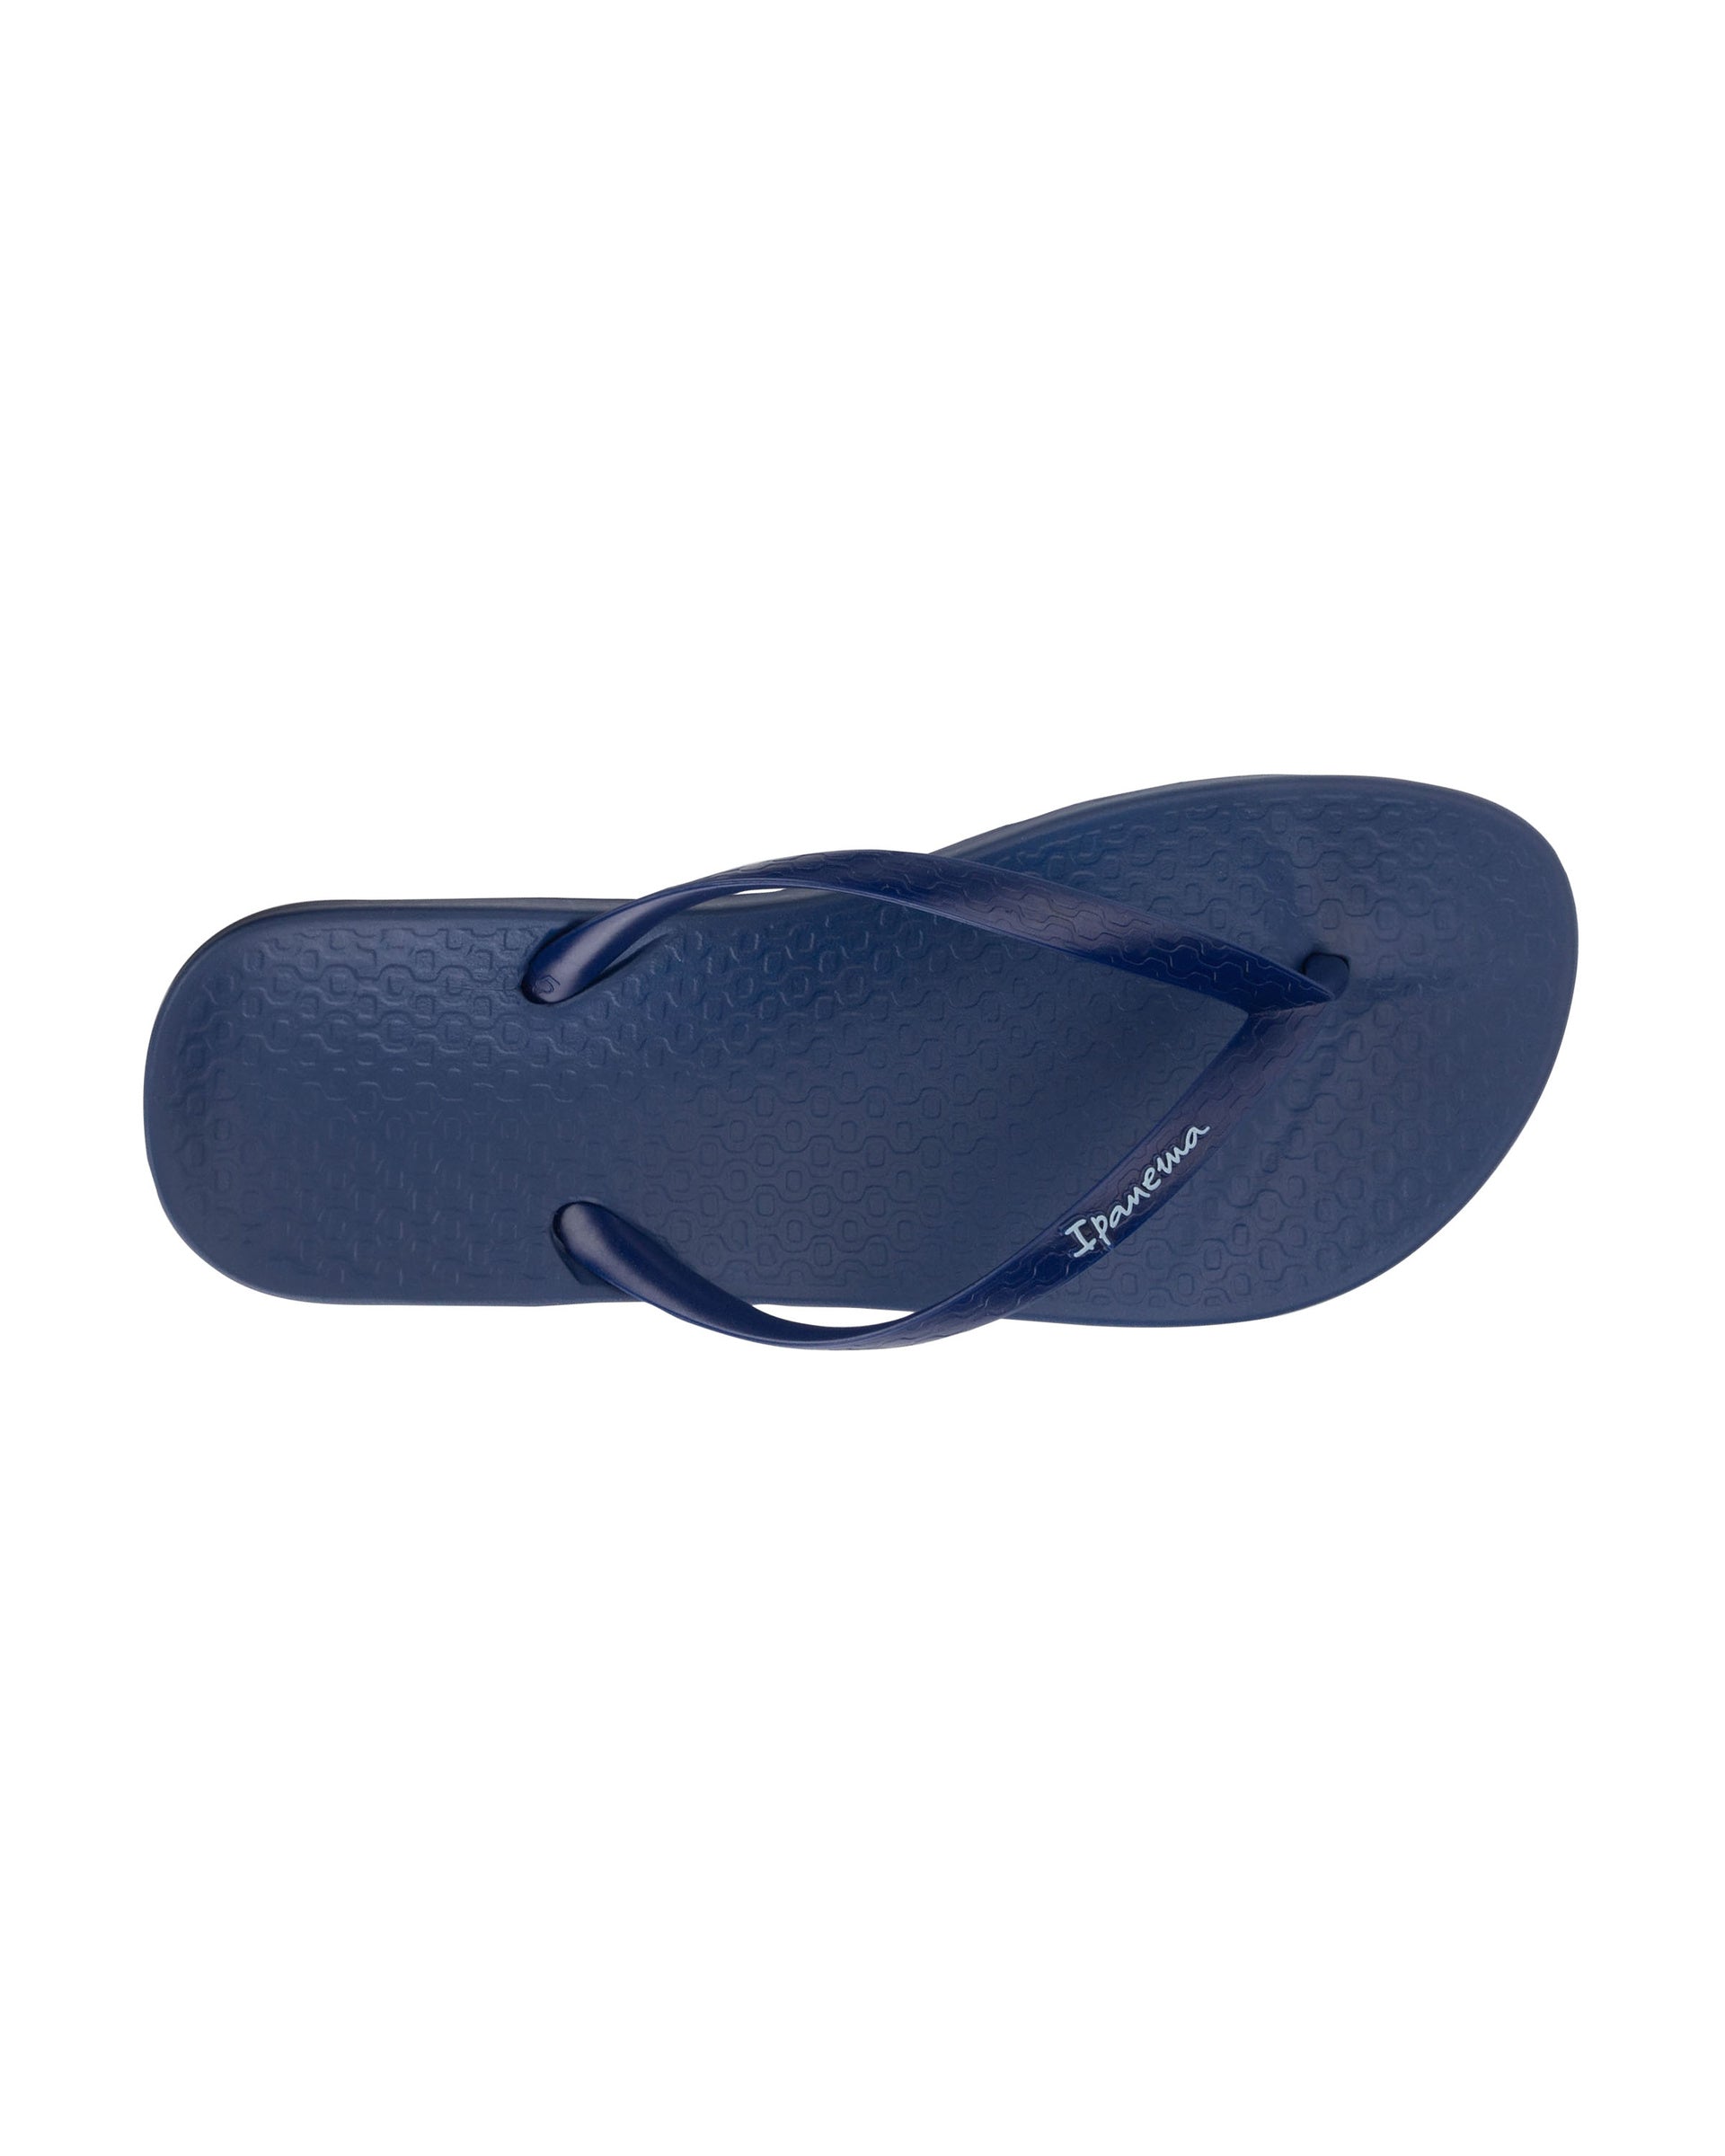 Top side view of a blue Ipanema Ana Colors women's flip flop.